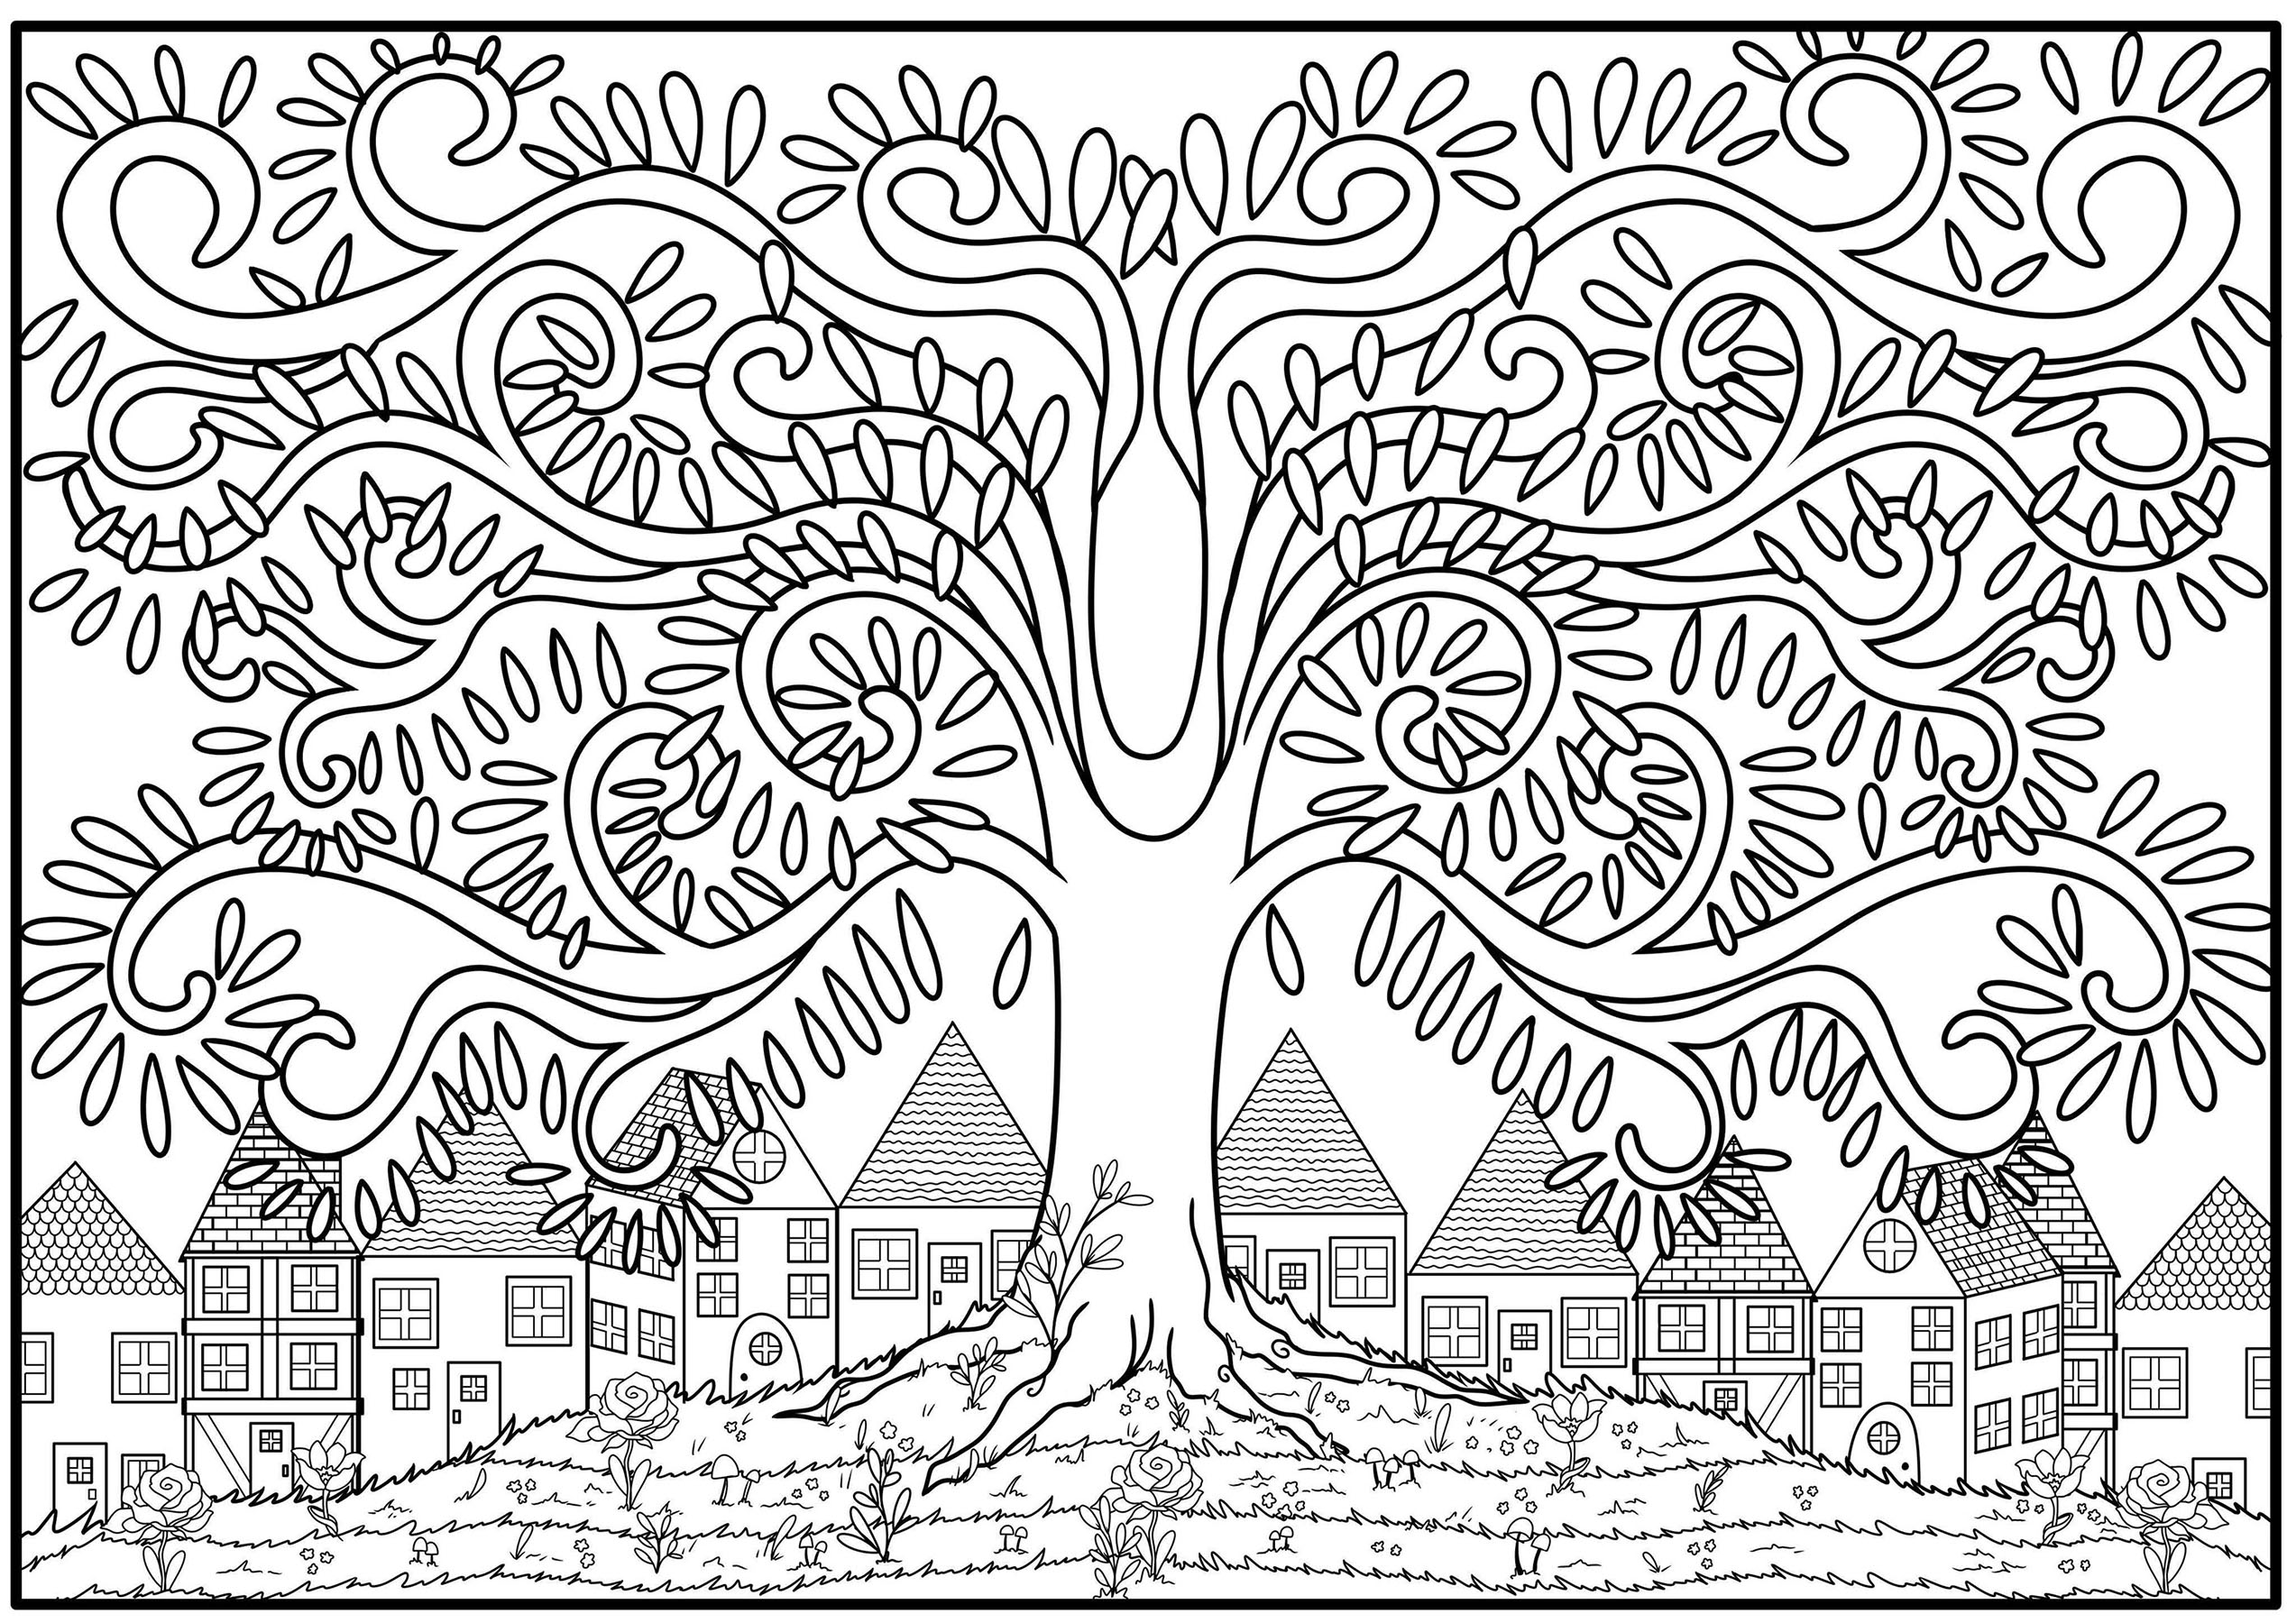 Coloring page of a tree with branch in the shape of arabesque, at the top of a flowered hill with houses in the background, Artist : Océane D